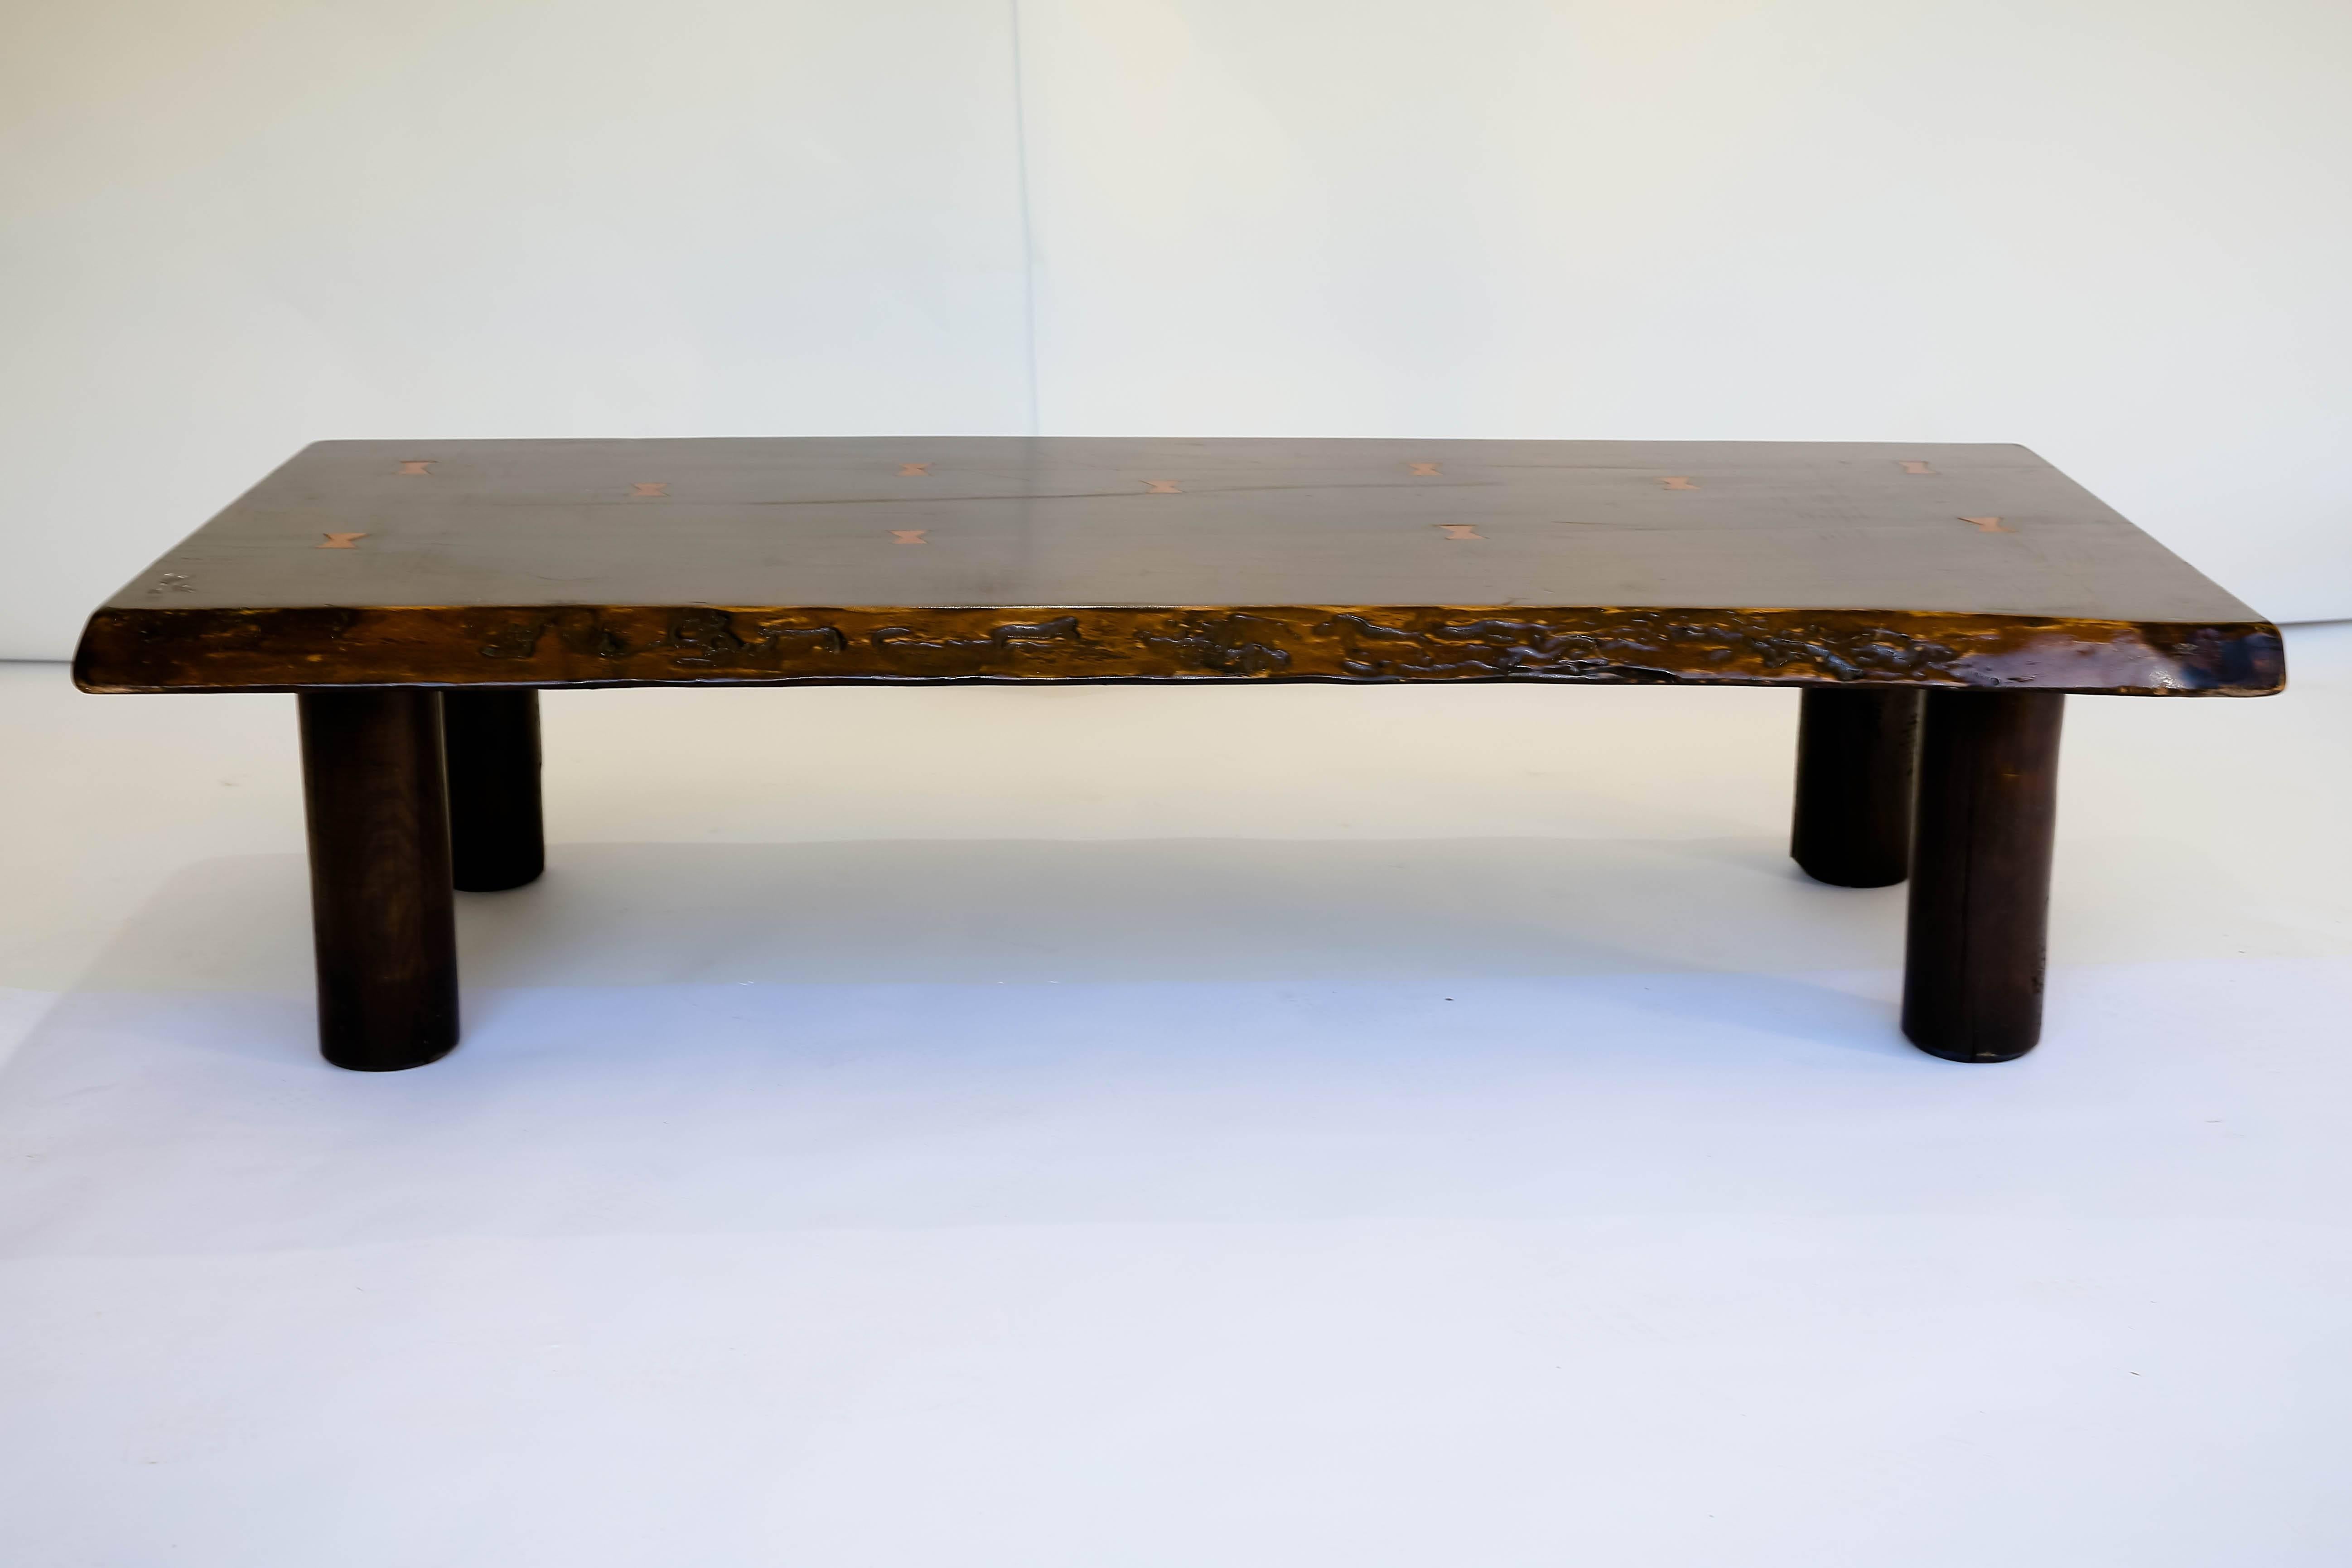 Solid wood live edge table with contrasting butterfly joint details on top - round tubular legs, excellent patina. 